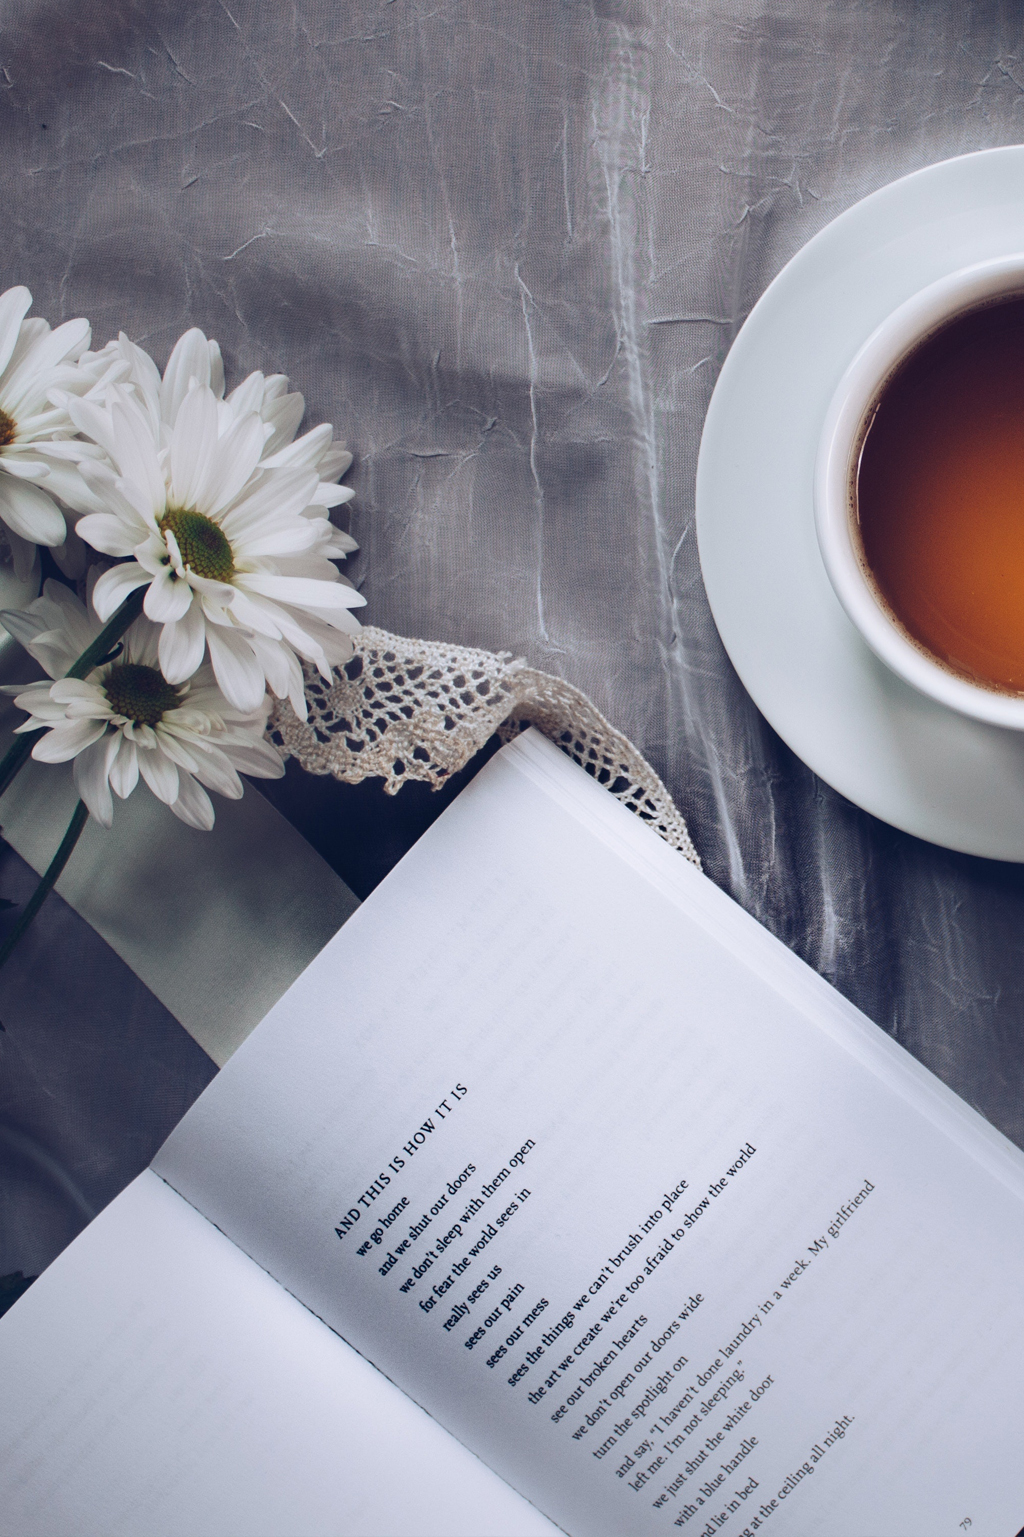 Open poetry book with cup of tea and white flowers